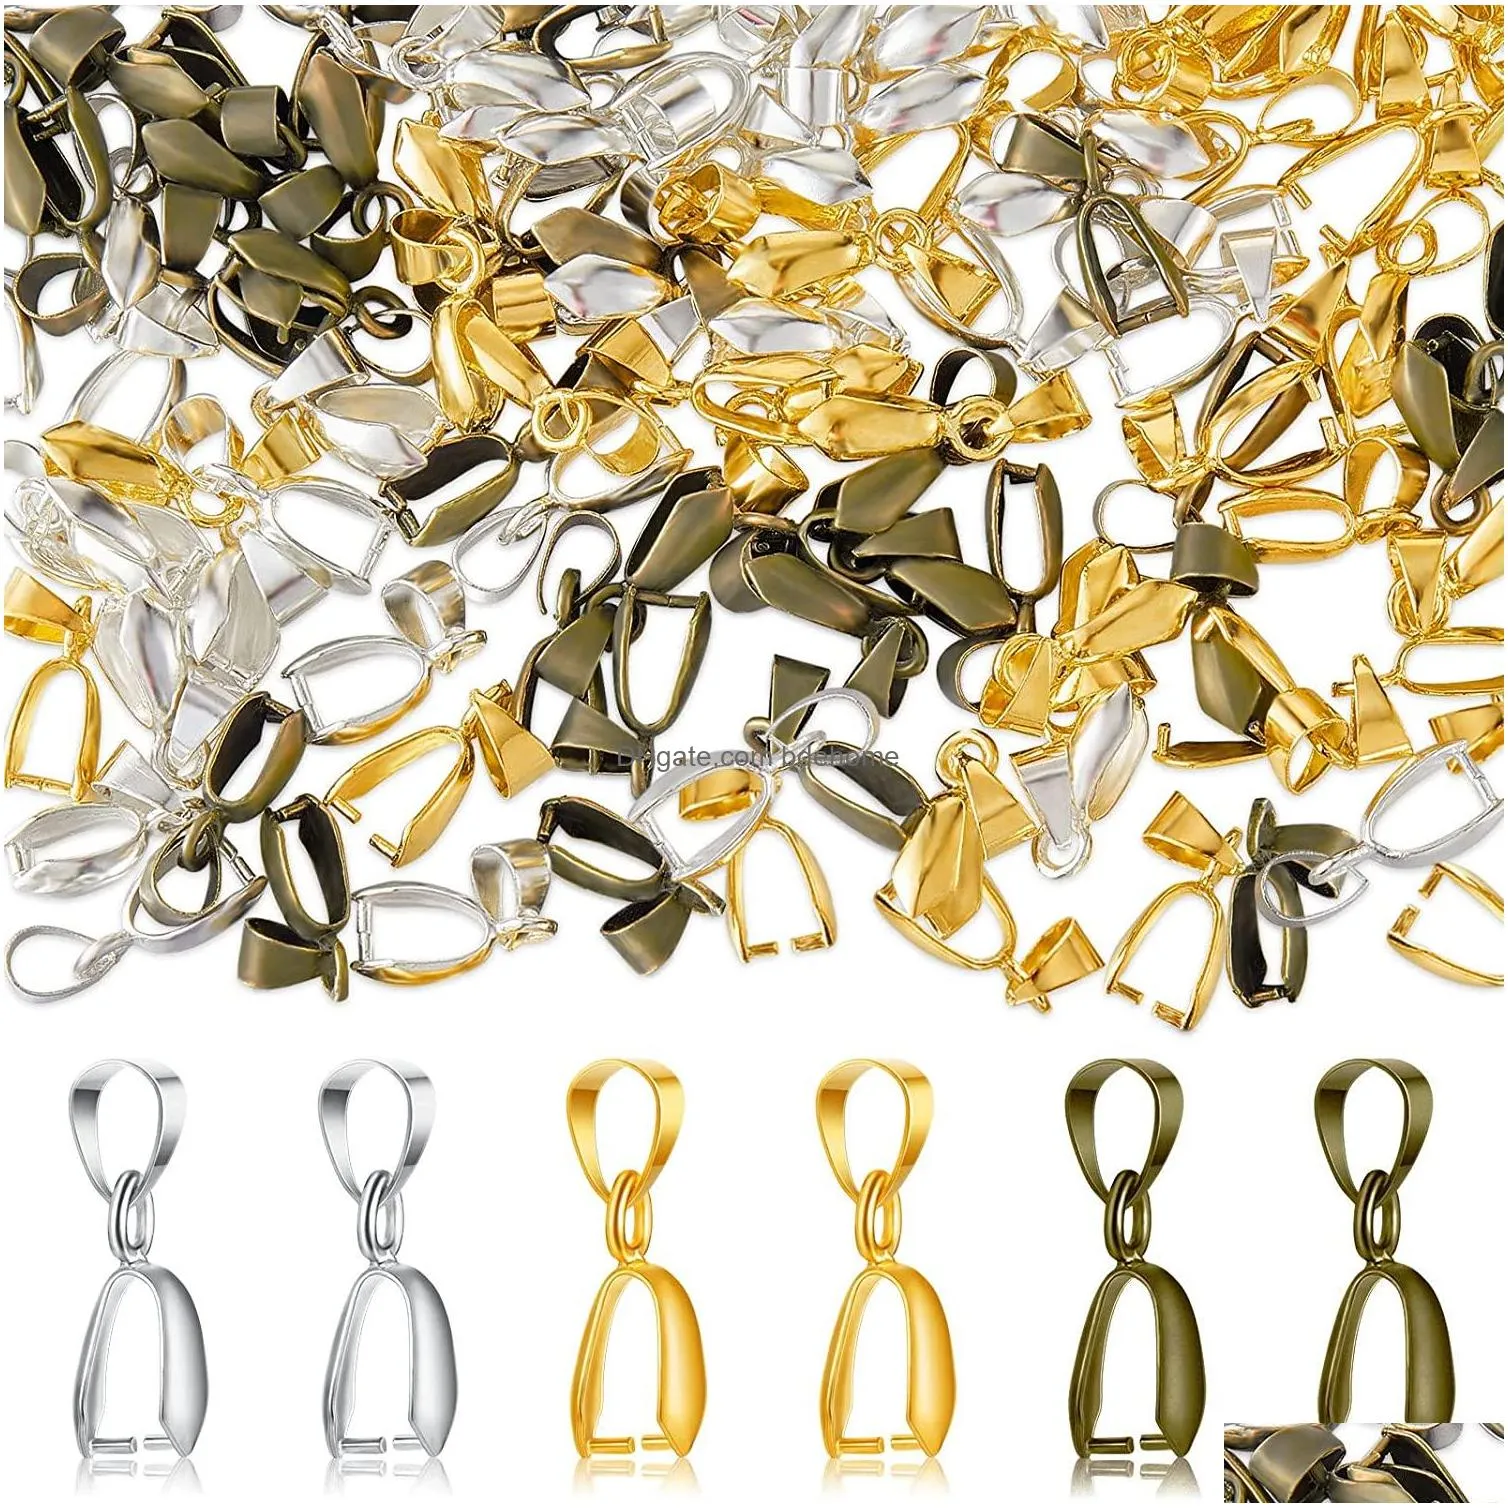 metal pinch clip clasp bail finish necklace pendant clasps claw bail hook connectors accessories findgings for jewelry diy craft making